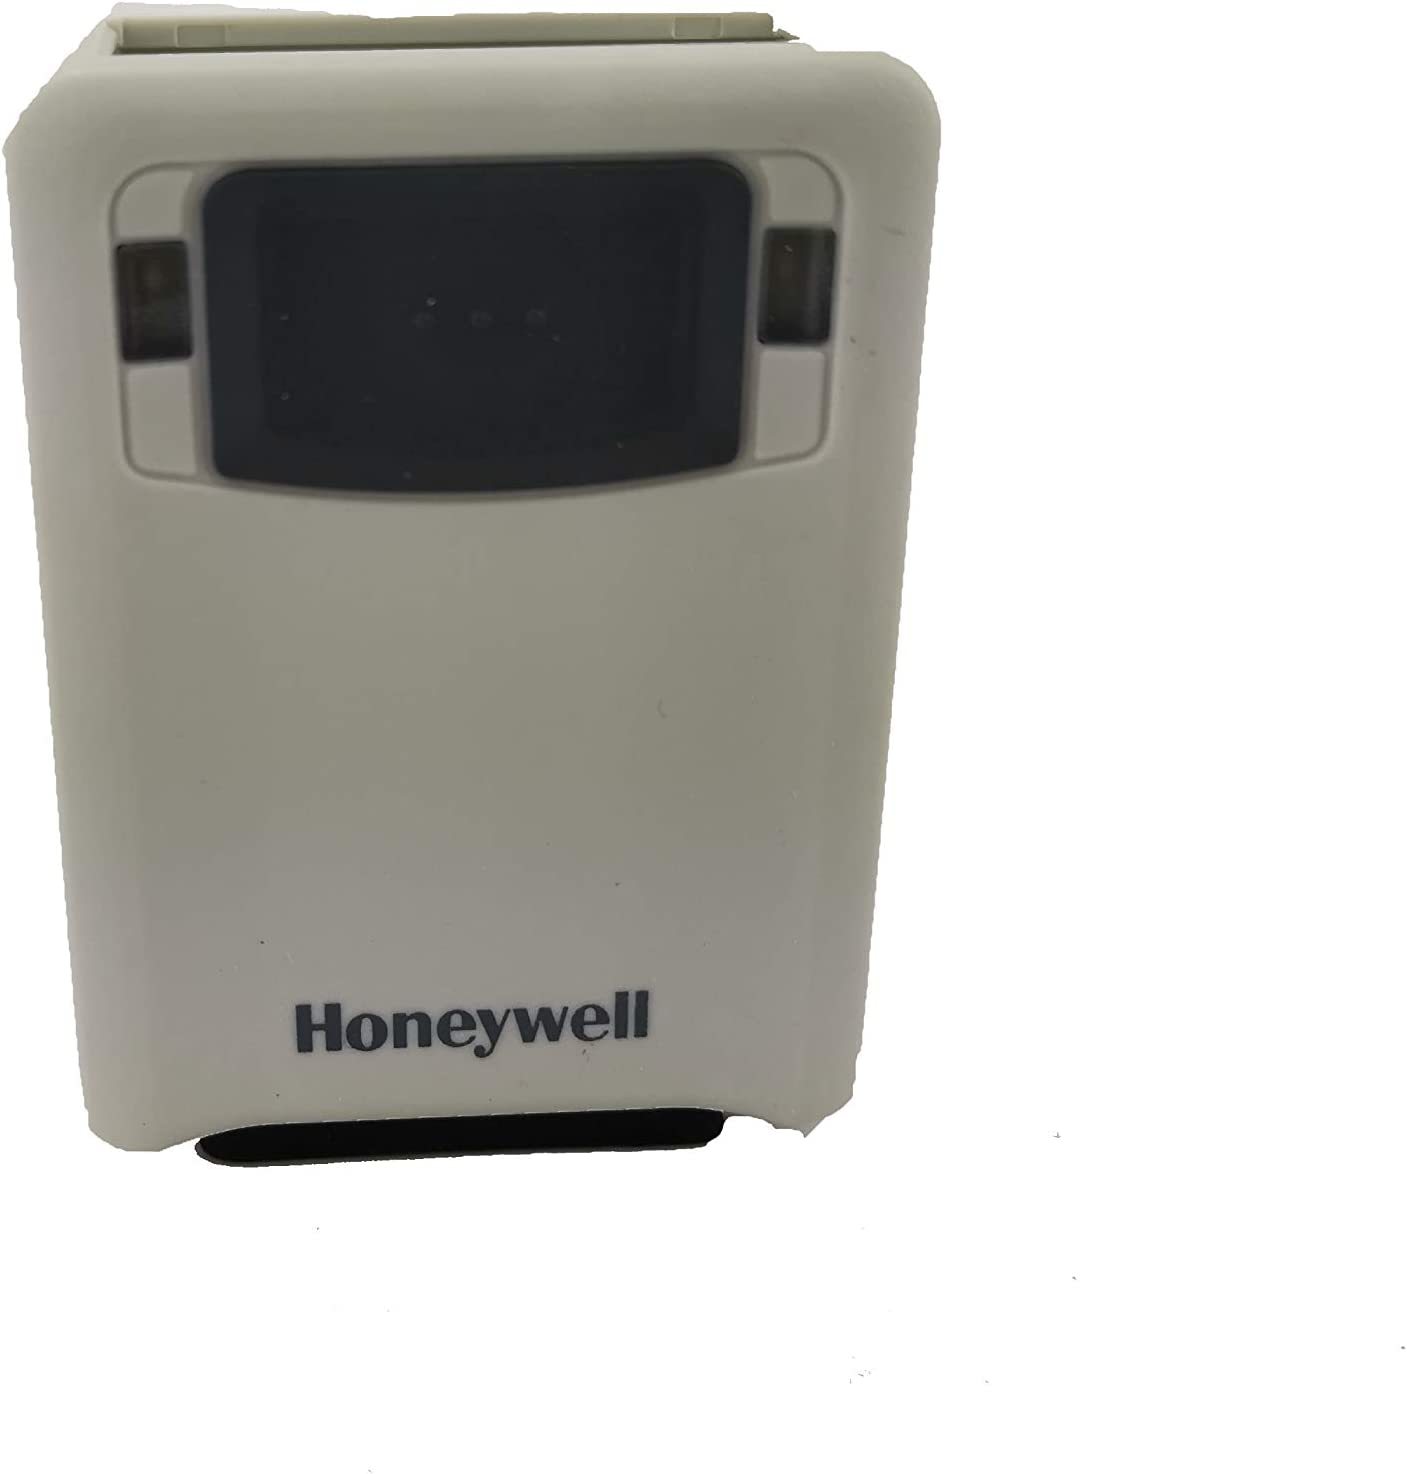 Primary image for Honeywell Vuquest 3320G Compact Area-Imaging Barcode Scanner (2D, 1D and PDF,